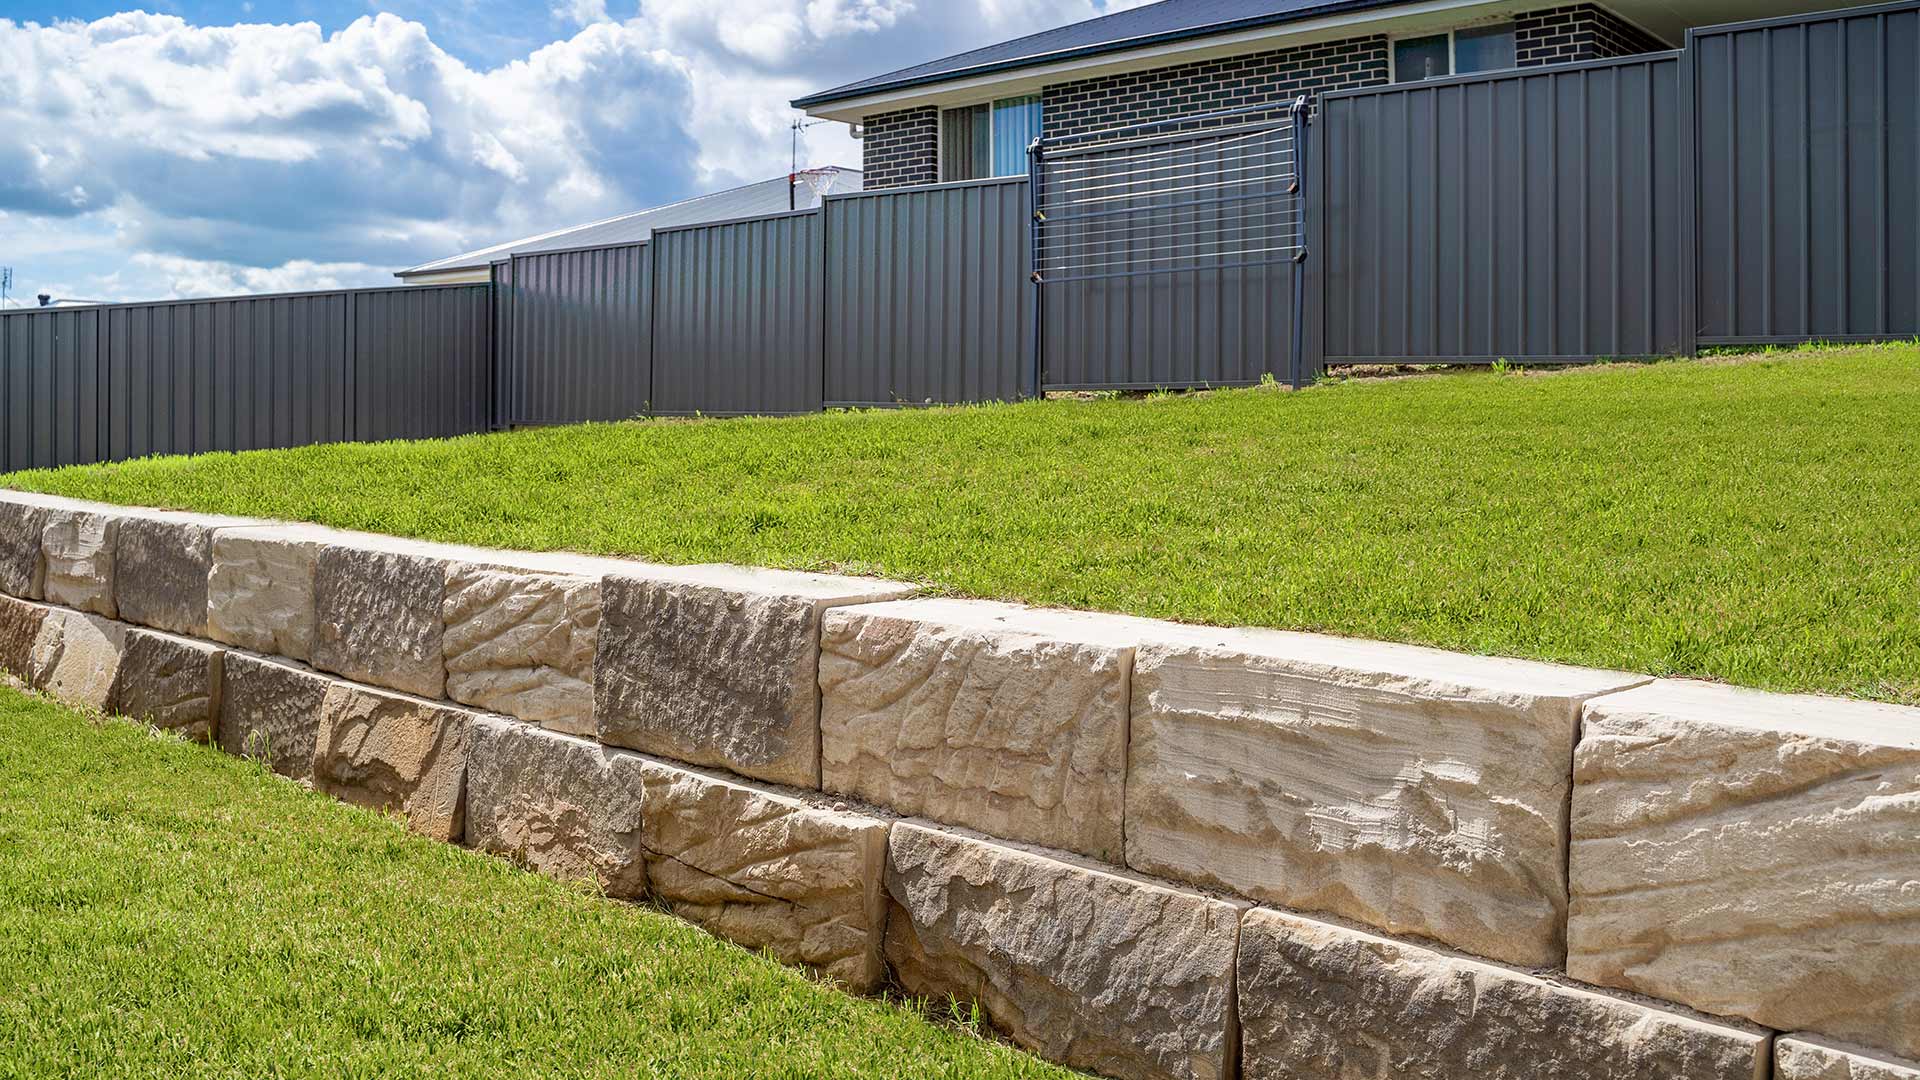 Is Your Property Sloped? Don’t Go Another Day without a Retaining Wall!